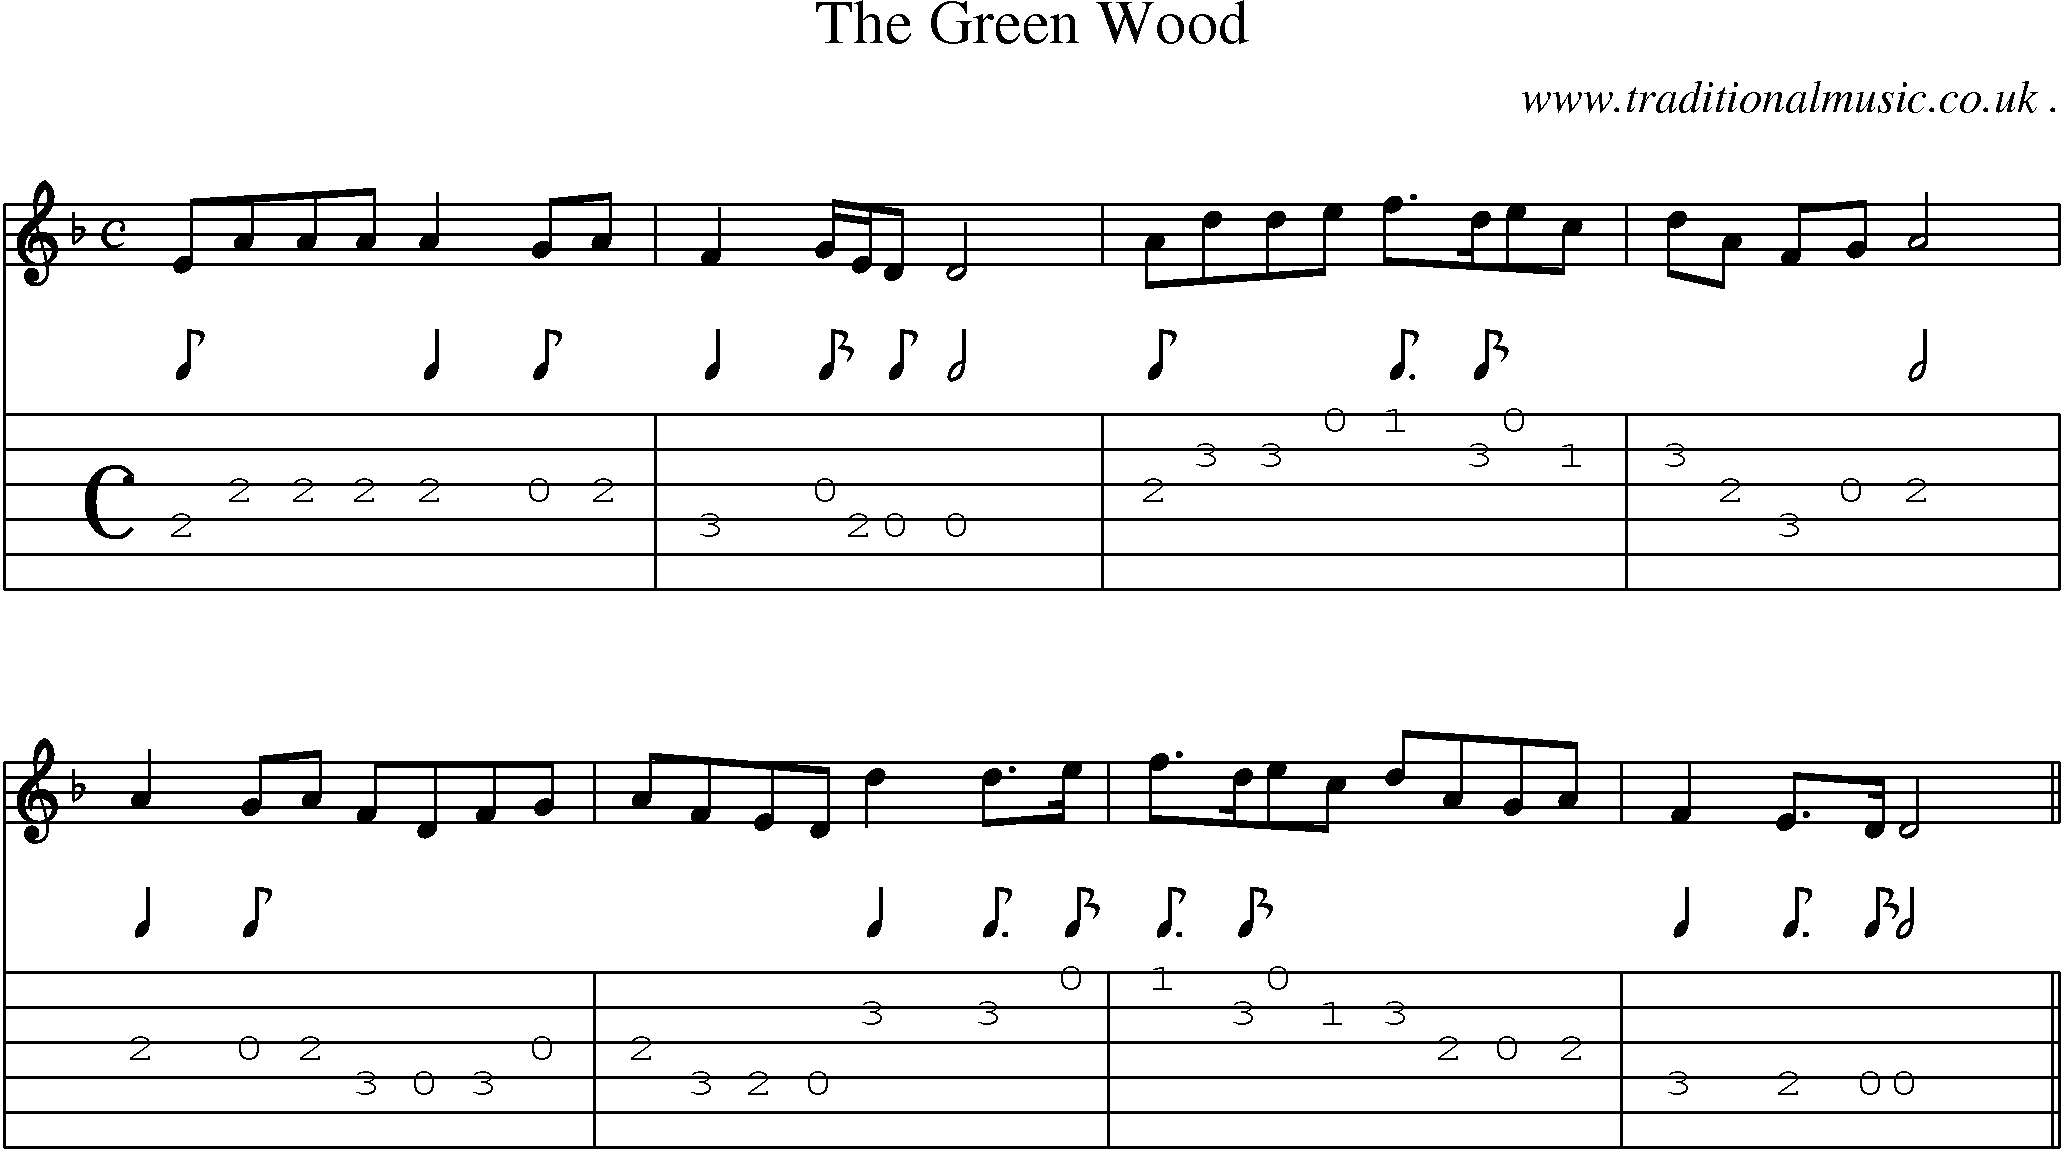 Sheet-Music and Guitar Tabs for The Green Wood